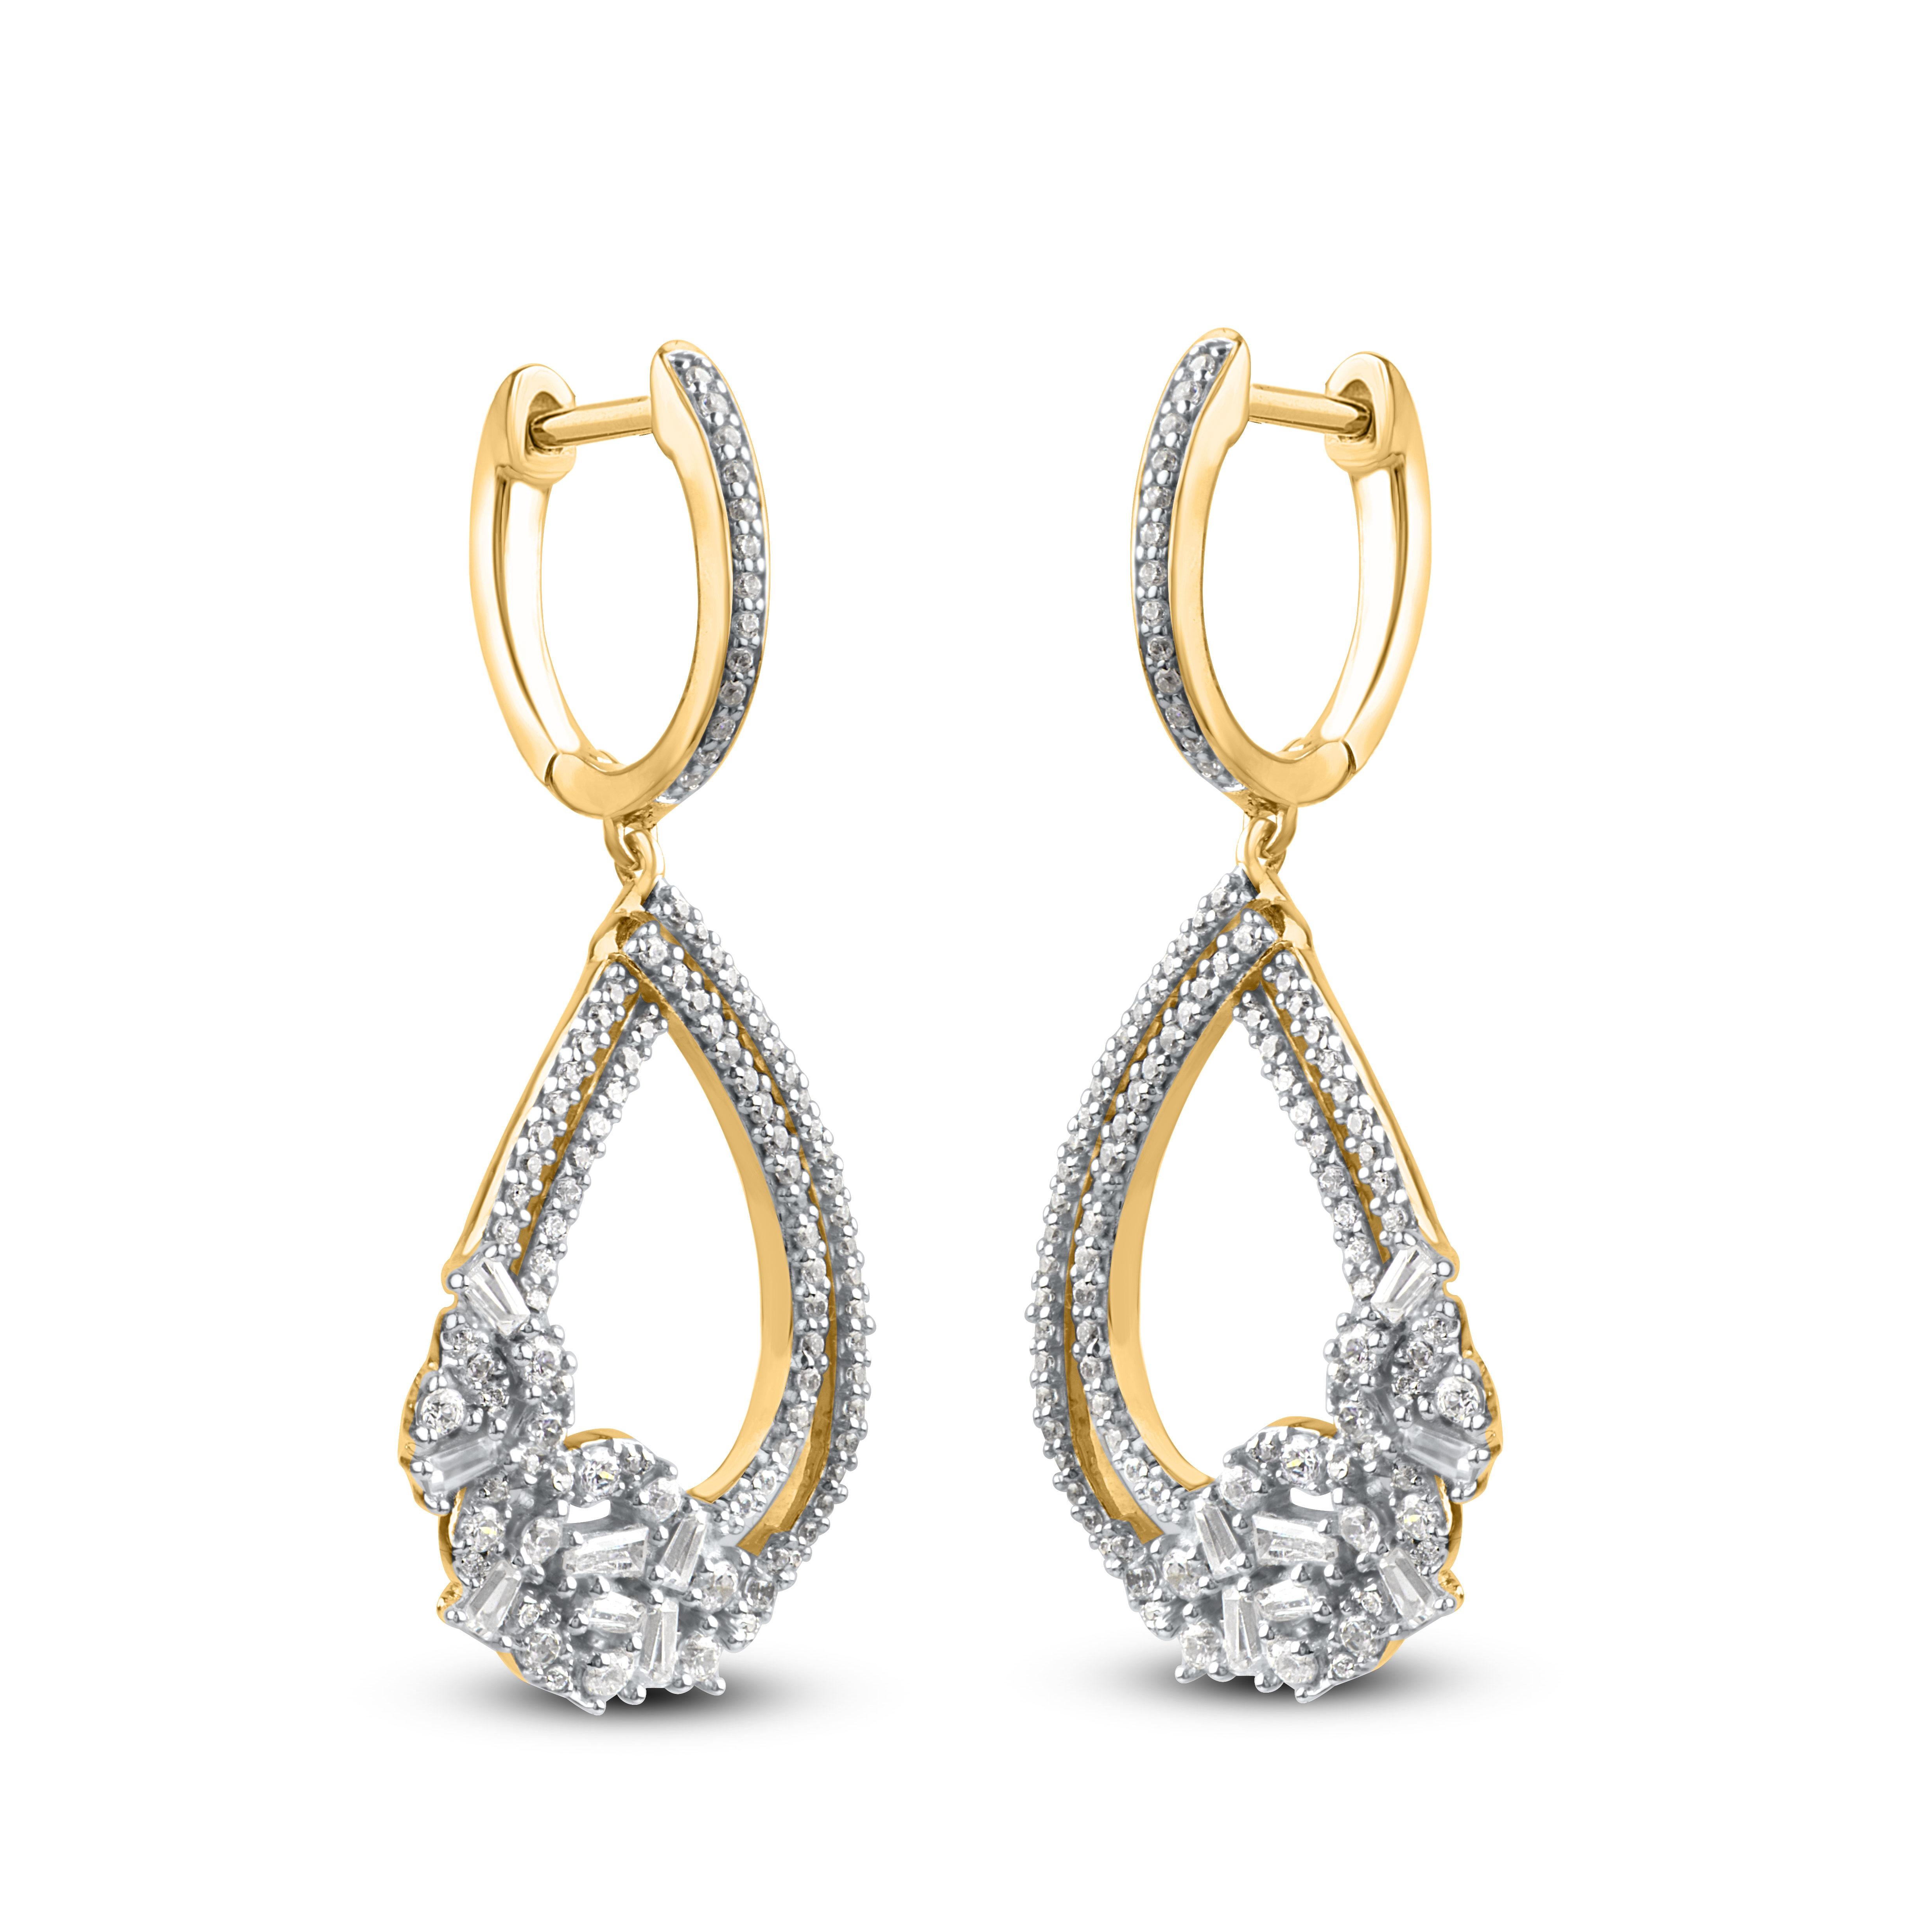 Smart and unique, these diamond dangle drop earrings are perfect for gifting. Made by in 14 karat rose gold and accentuated with 198 round brilliant and 14 baguette-cut diamond in prong and pave setting, which shines in H-I color I2 clarity.